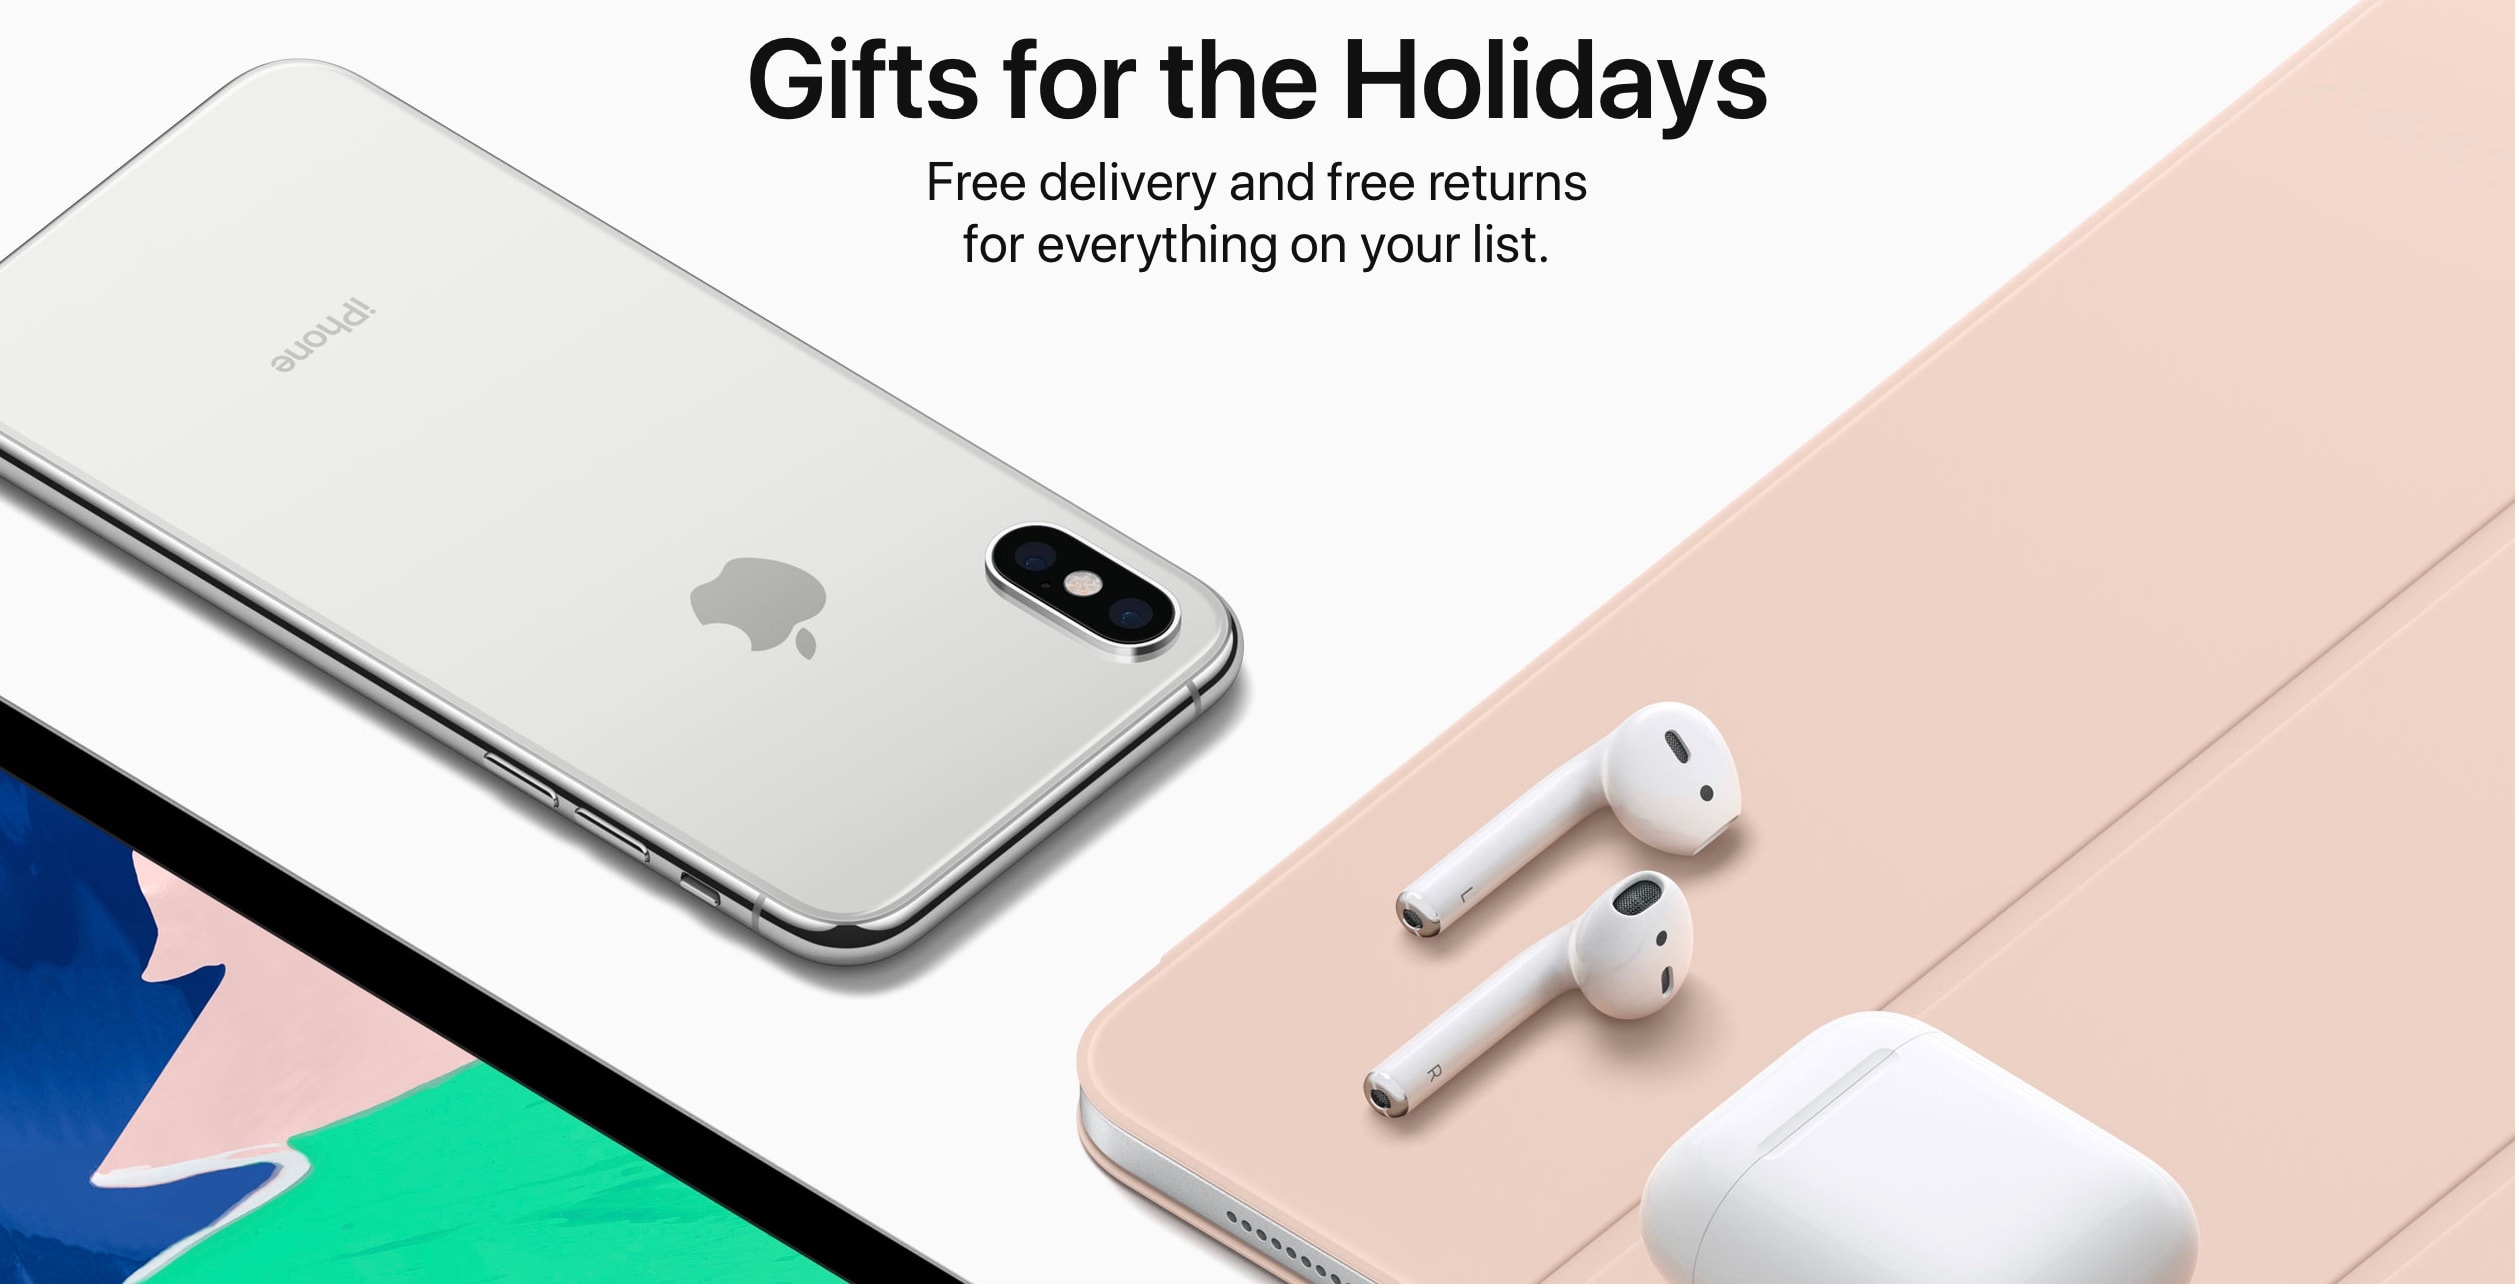 Apple gifts bought now can be returned in January.